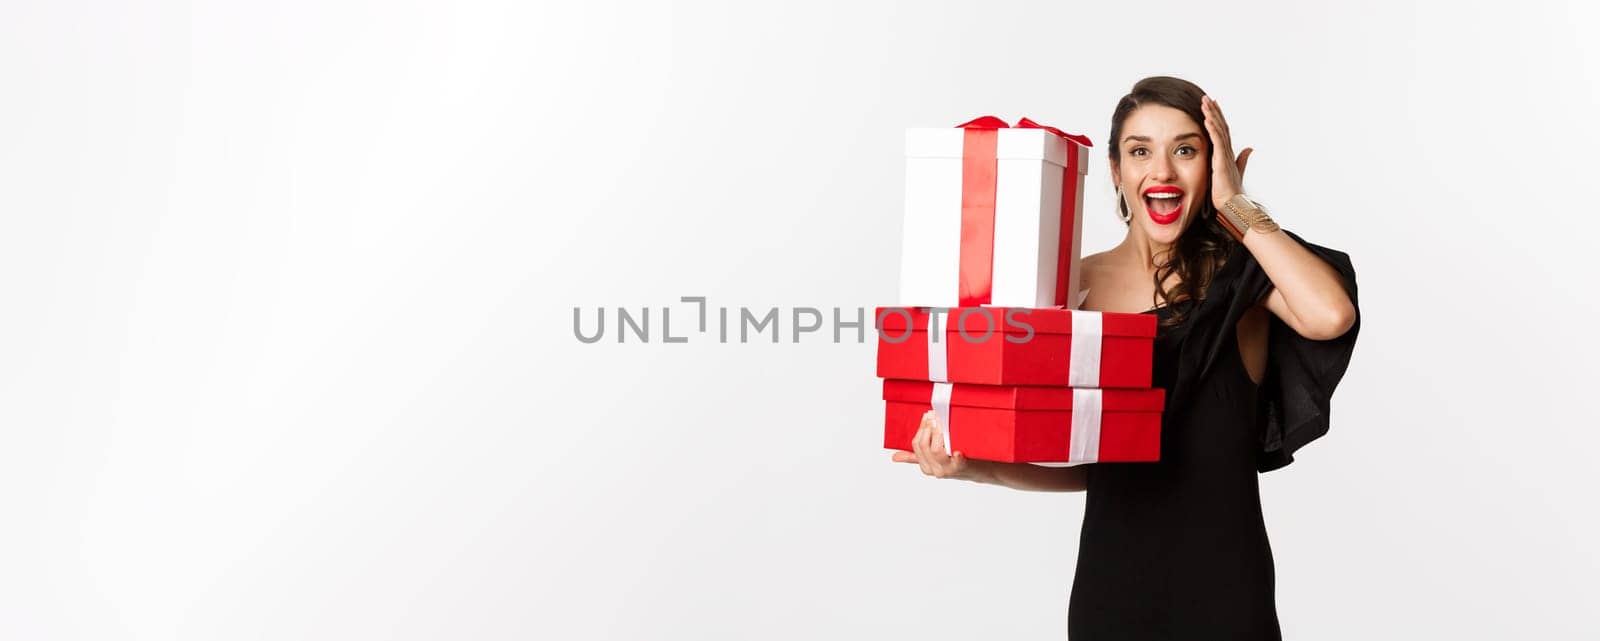 Celebration and christmas holidays concept. Excited and happy woman receive gifts, holding xmas presents and rejoicing, standing in black dress over white background.